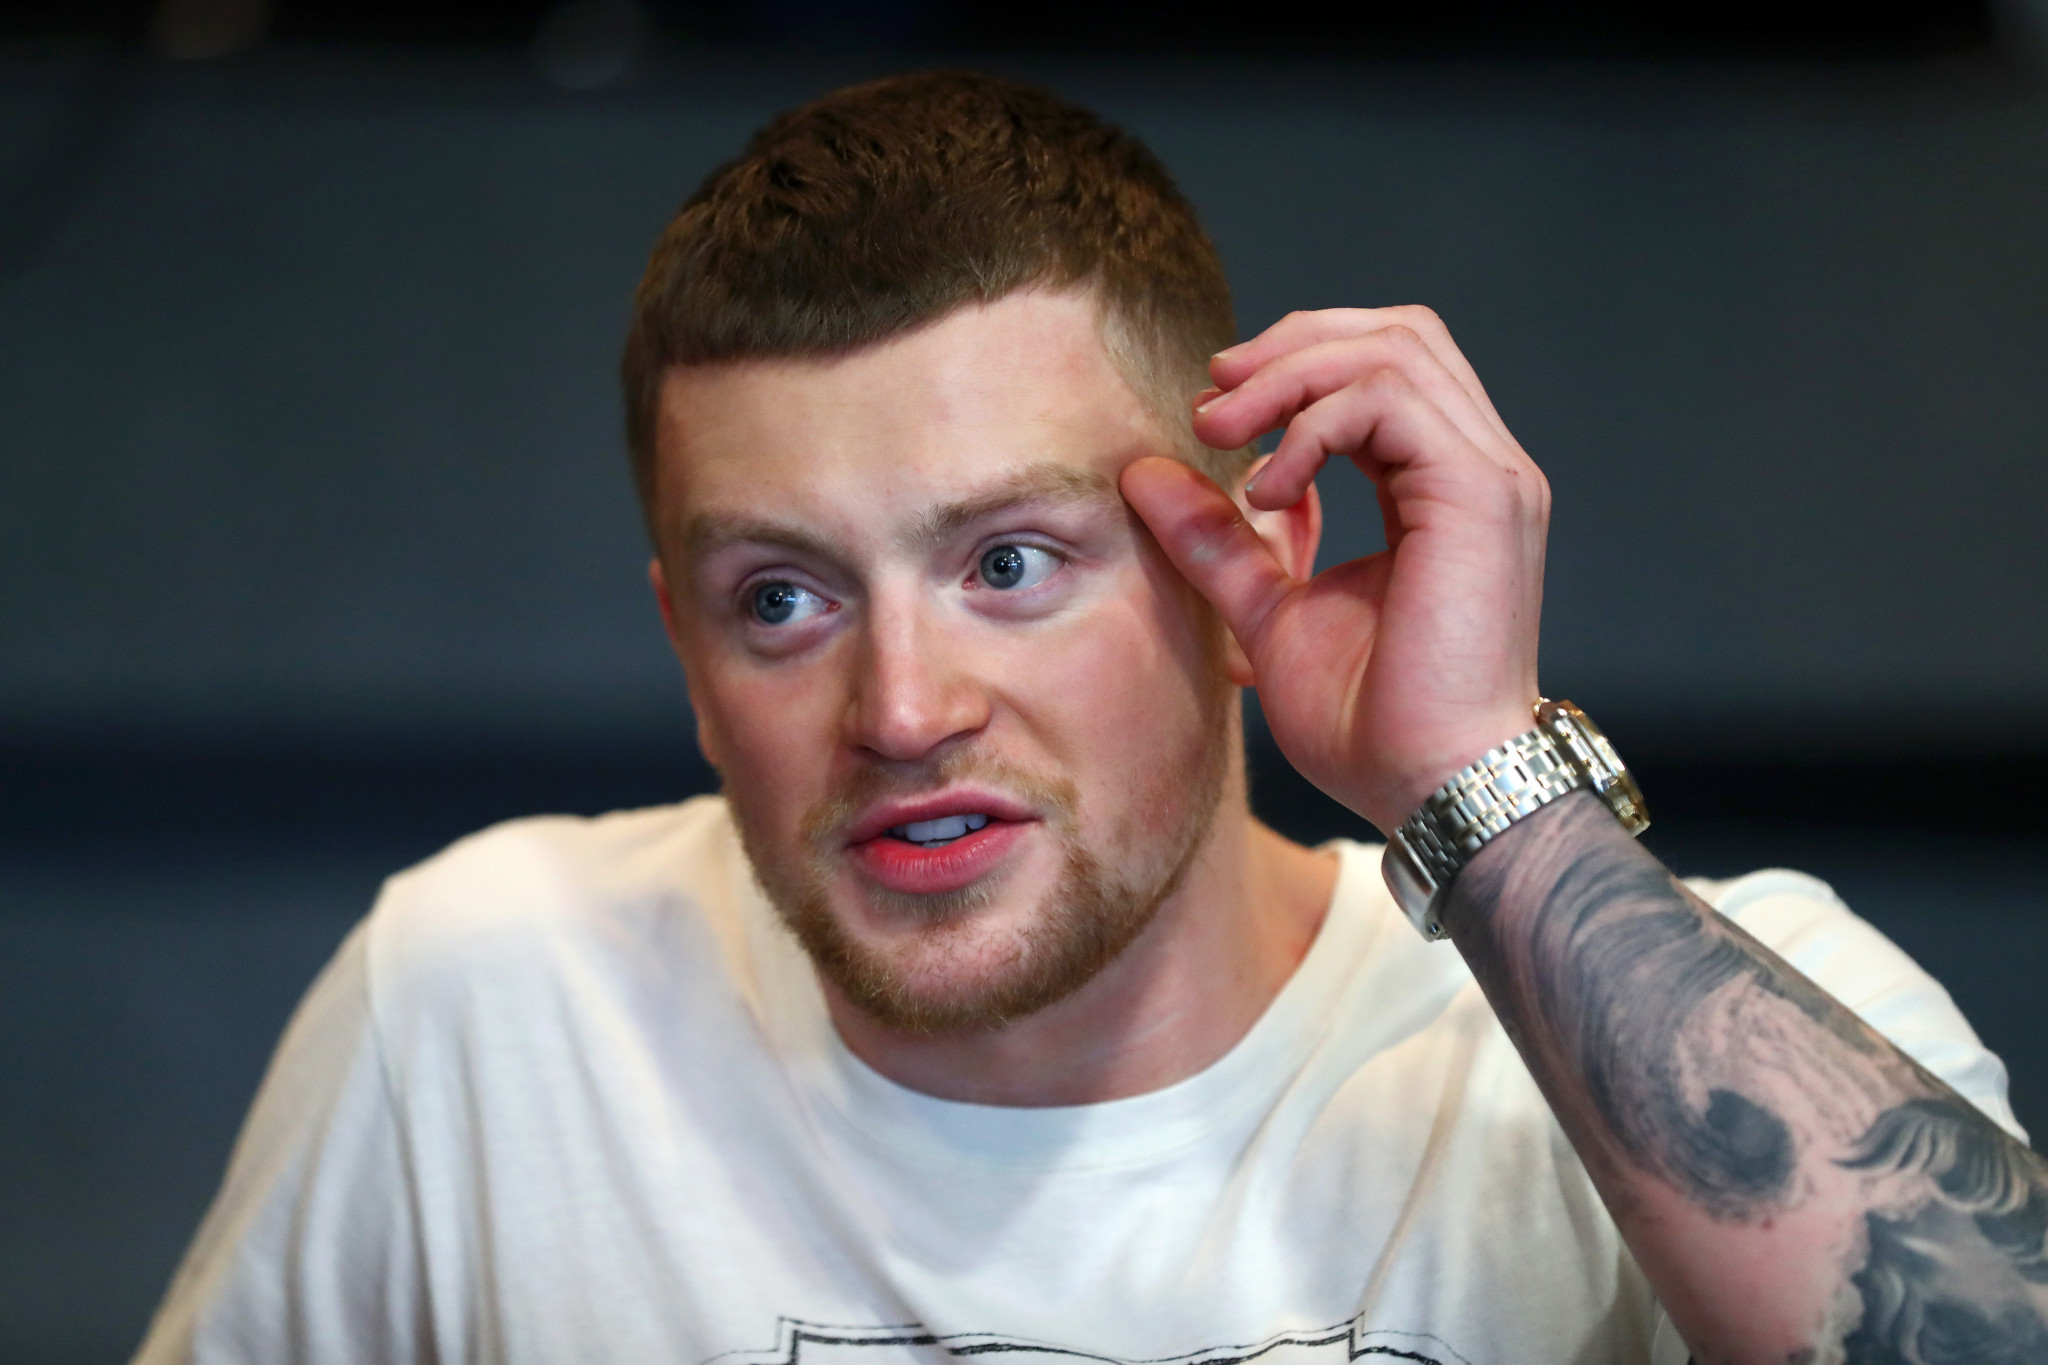 Adam Peaty has been confirmed as a key member of a London swimming team which will compete in the inaugural season of the privately-financed International Swimming League ©Getty Images